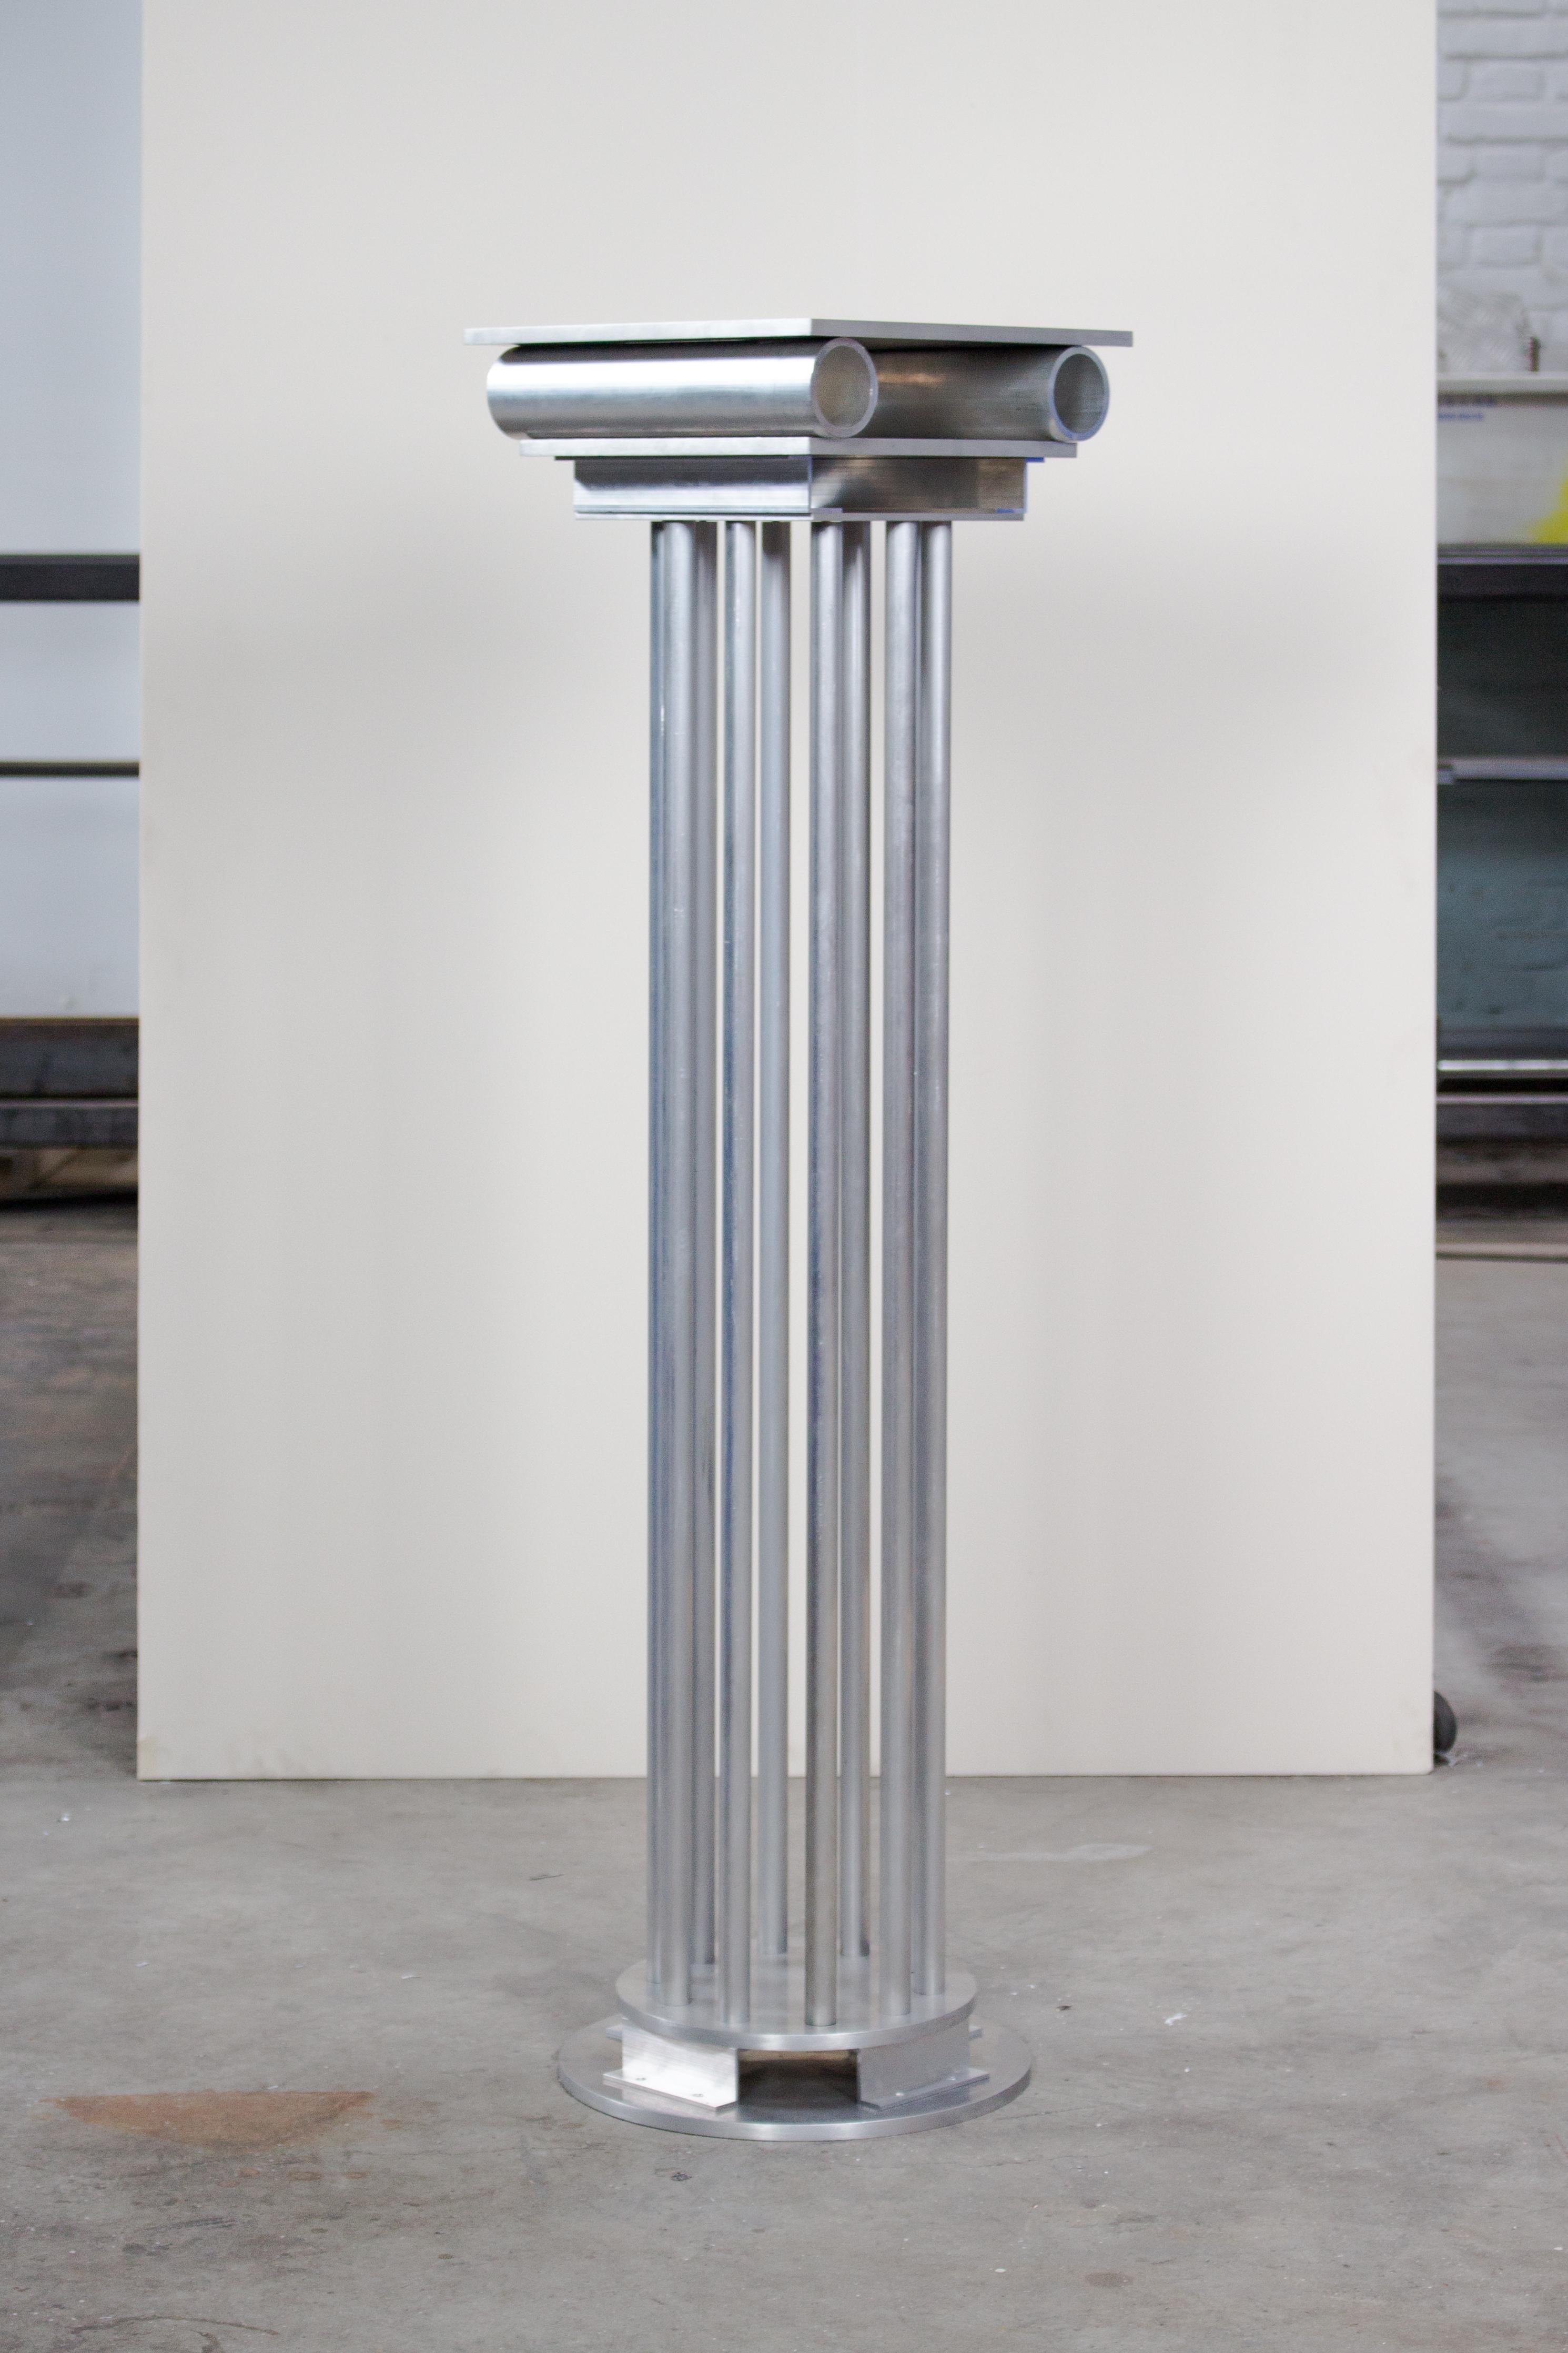 Metope column by Joachim-Morineau Studio
Dimensions: H 110 x D 30 x W 30 cm, 20 kg
Materials: Aluminium tubes, profiles, screws and sheets
Possibility to have a different colour/finish (such as blasted or anodized aluminium).

THOLOS, PTERON